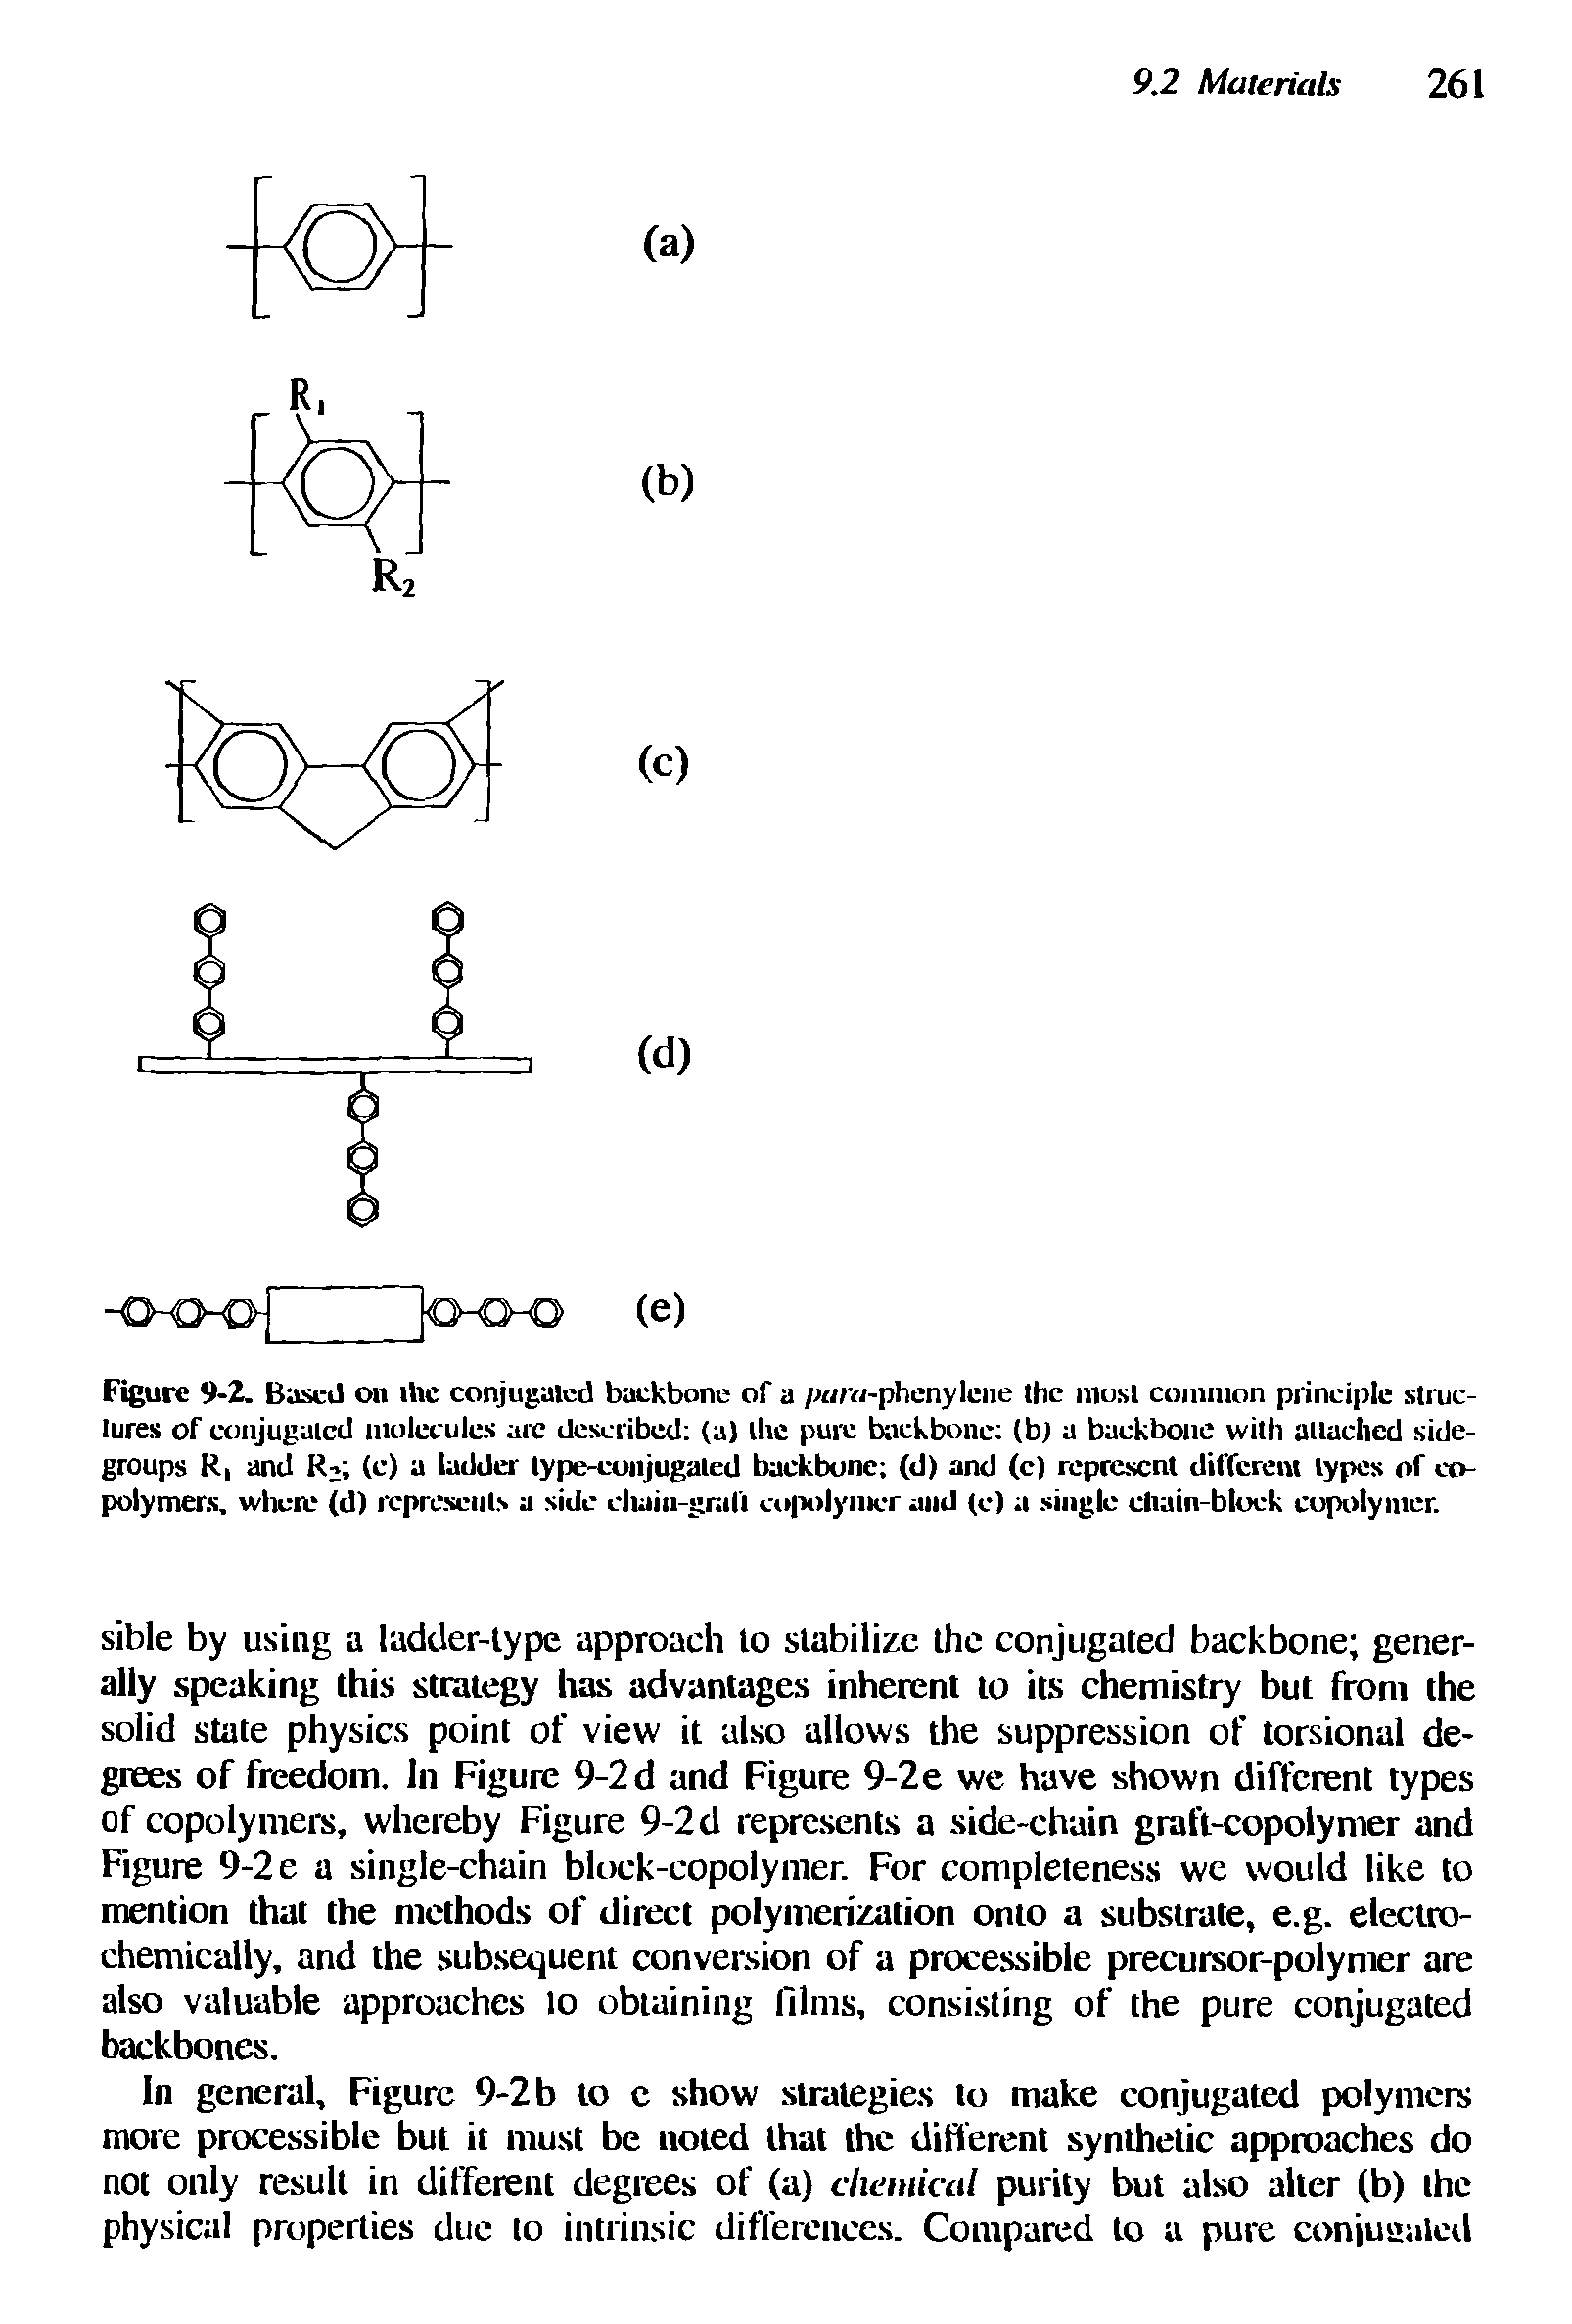 Figure 9-2. Based on ihe conjugated backbone of a /H/ra-phenylcne the most common principle structures of conjugated molecules am described (a) the pure backbone (b) a backbone with attached side-groups R and R (e) a ladder type-eonjugaled backbone (d) and (c) represent different types of copolymers. where (d) represents a side cliain-gnill copolymer and (c) a single eliain-bloek copolymer.